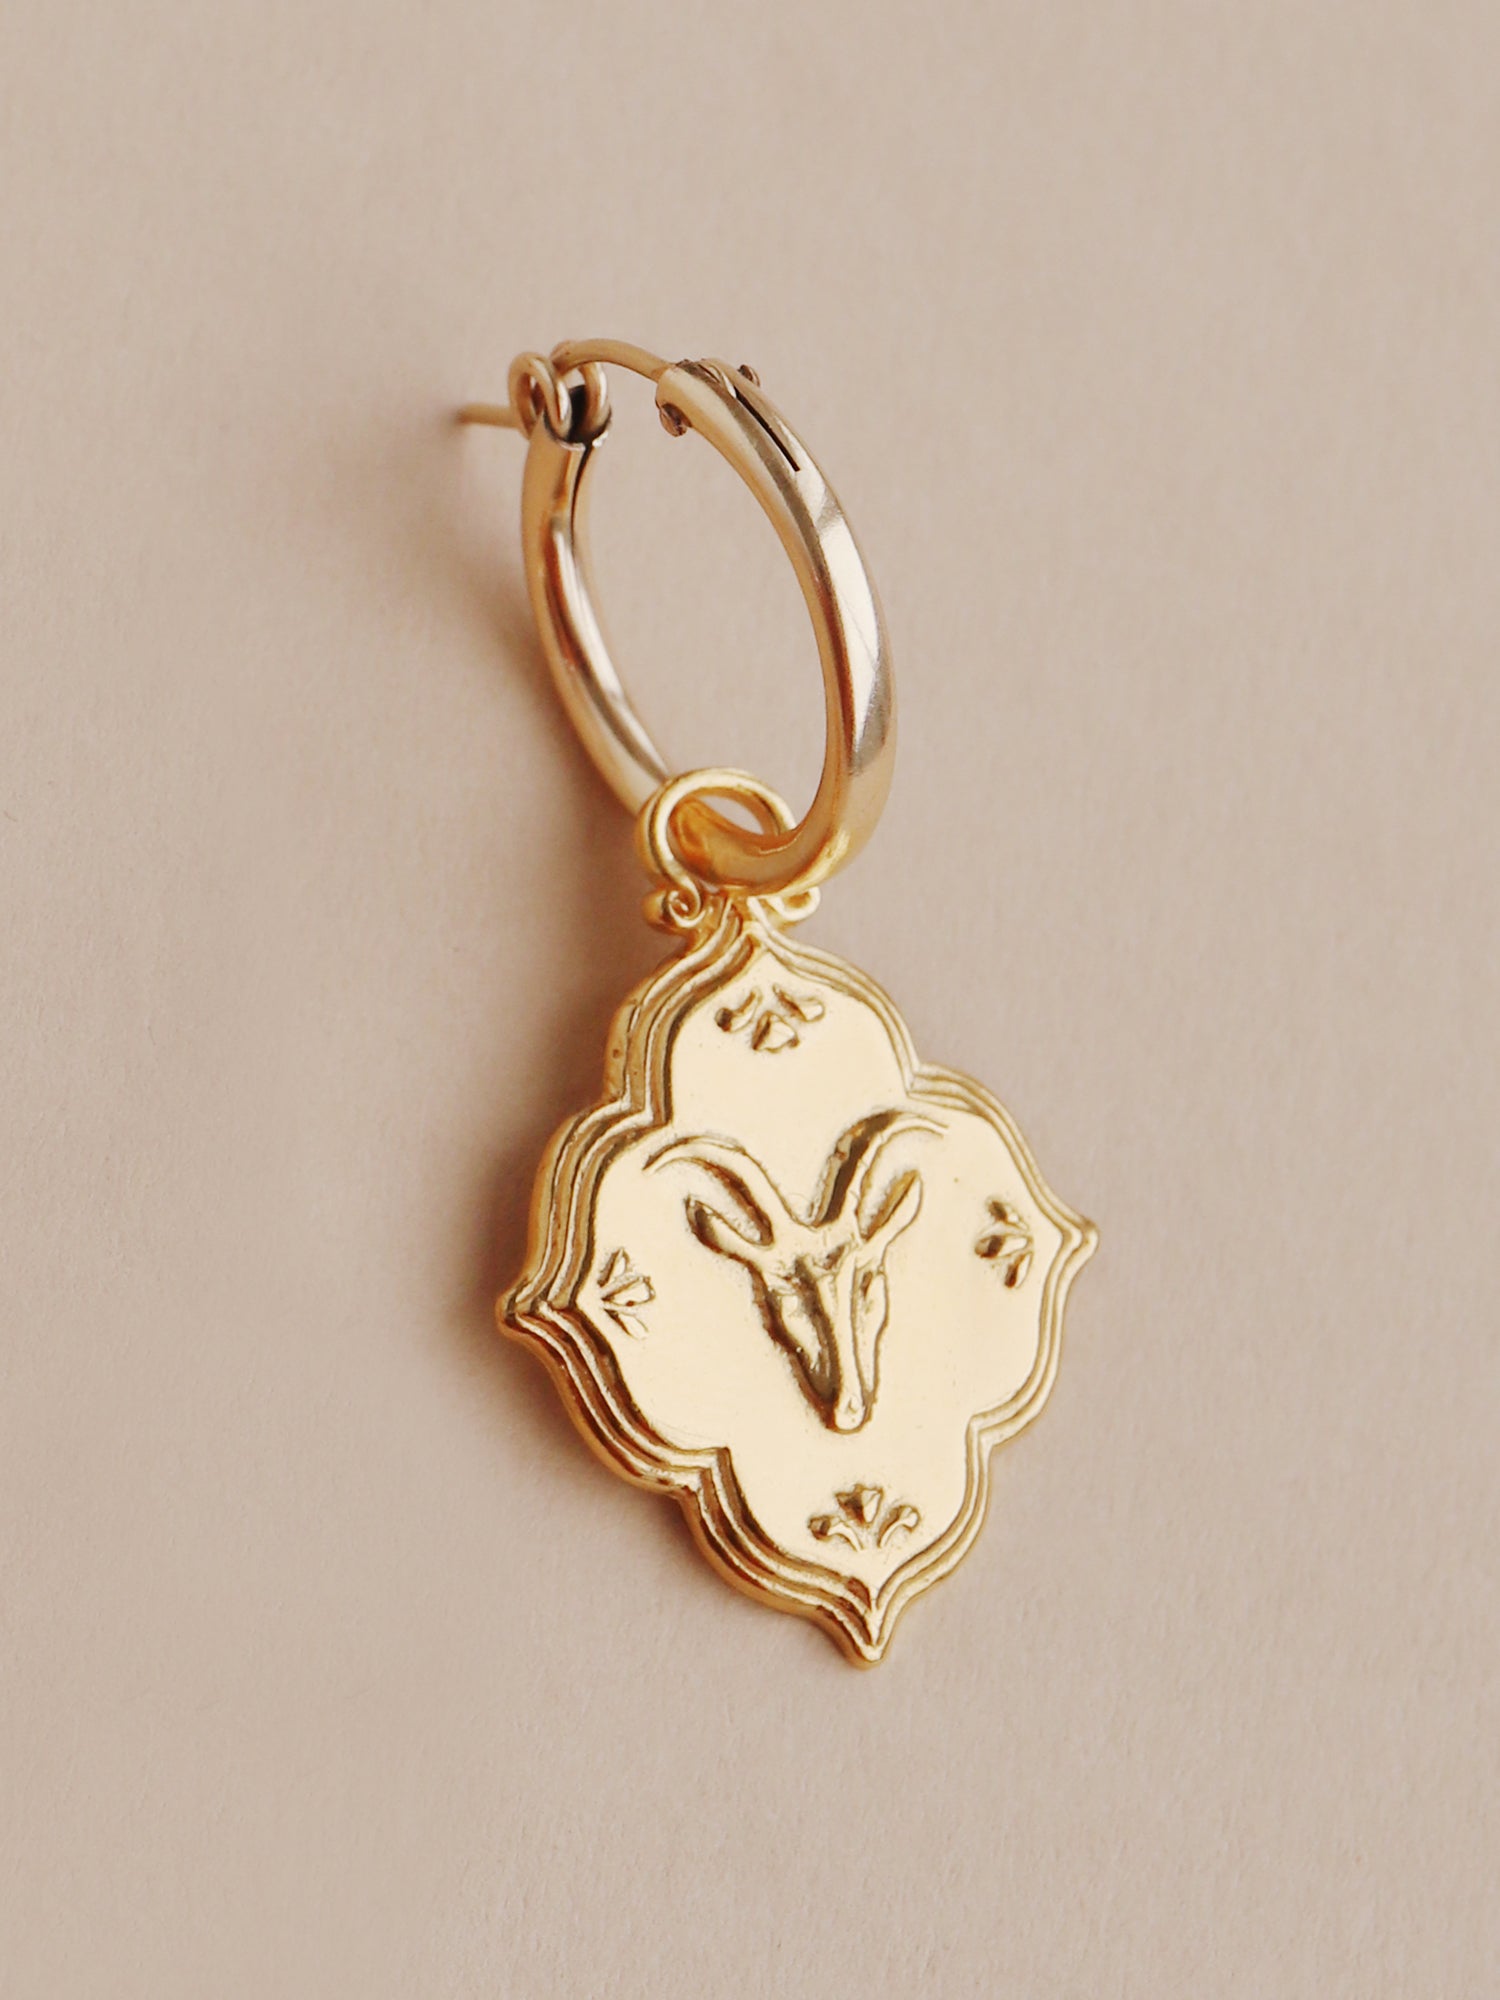 Capricorn - Individual Charm in Gold